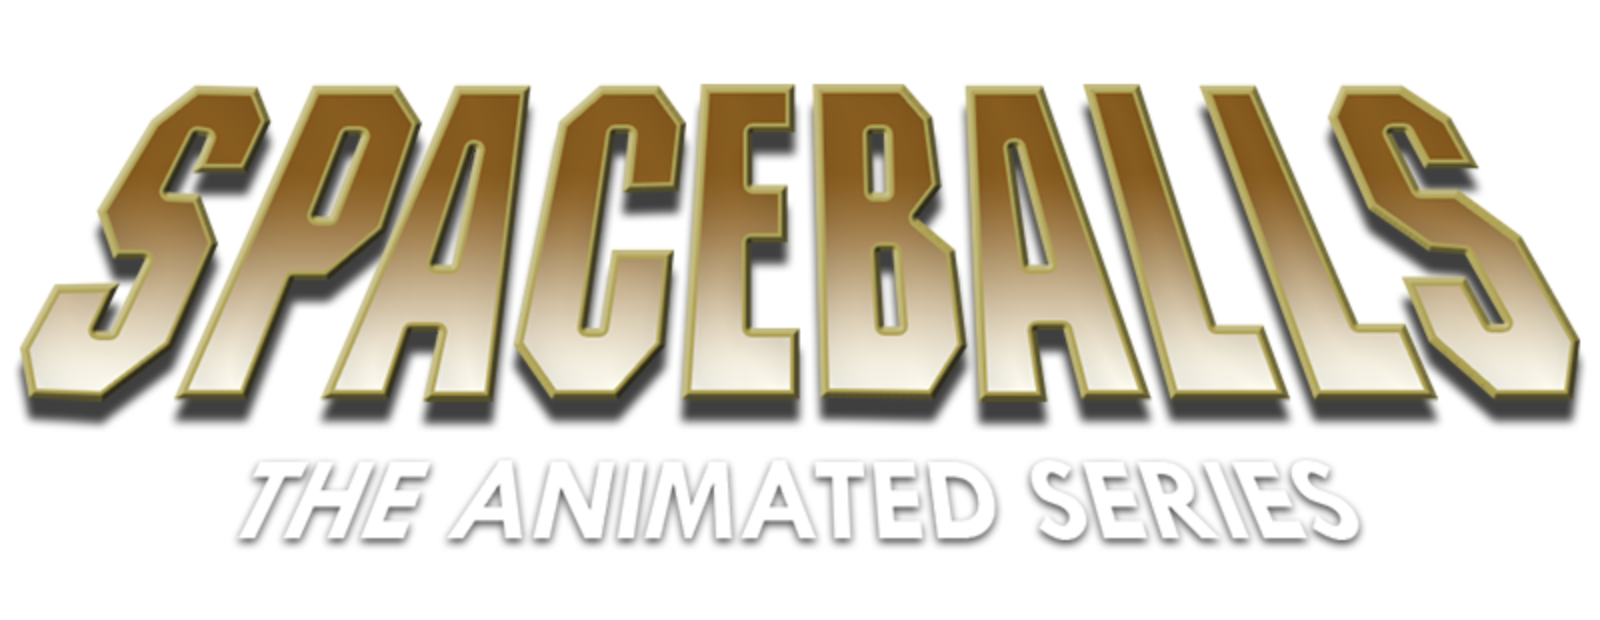 Spaceballs: The Animated Series Complete (2 DVDs Box Set)